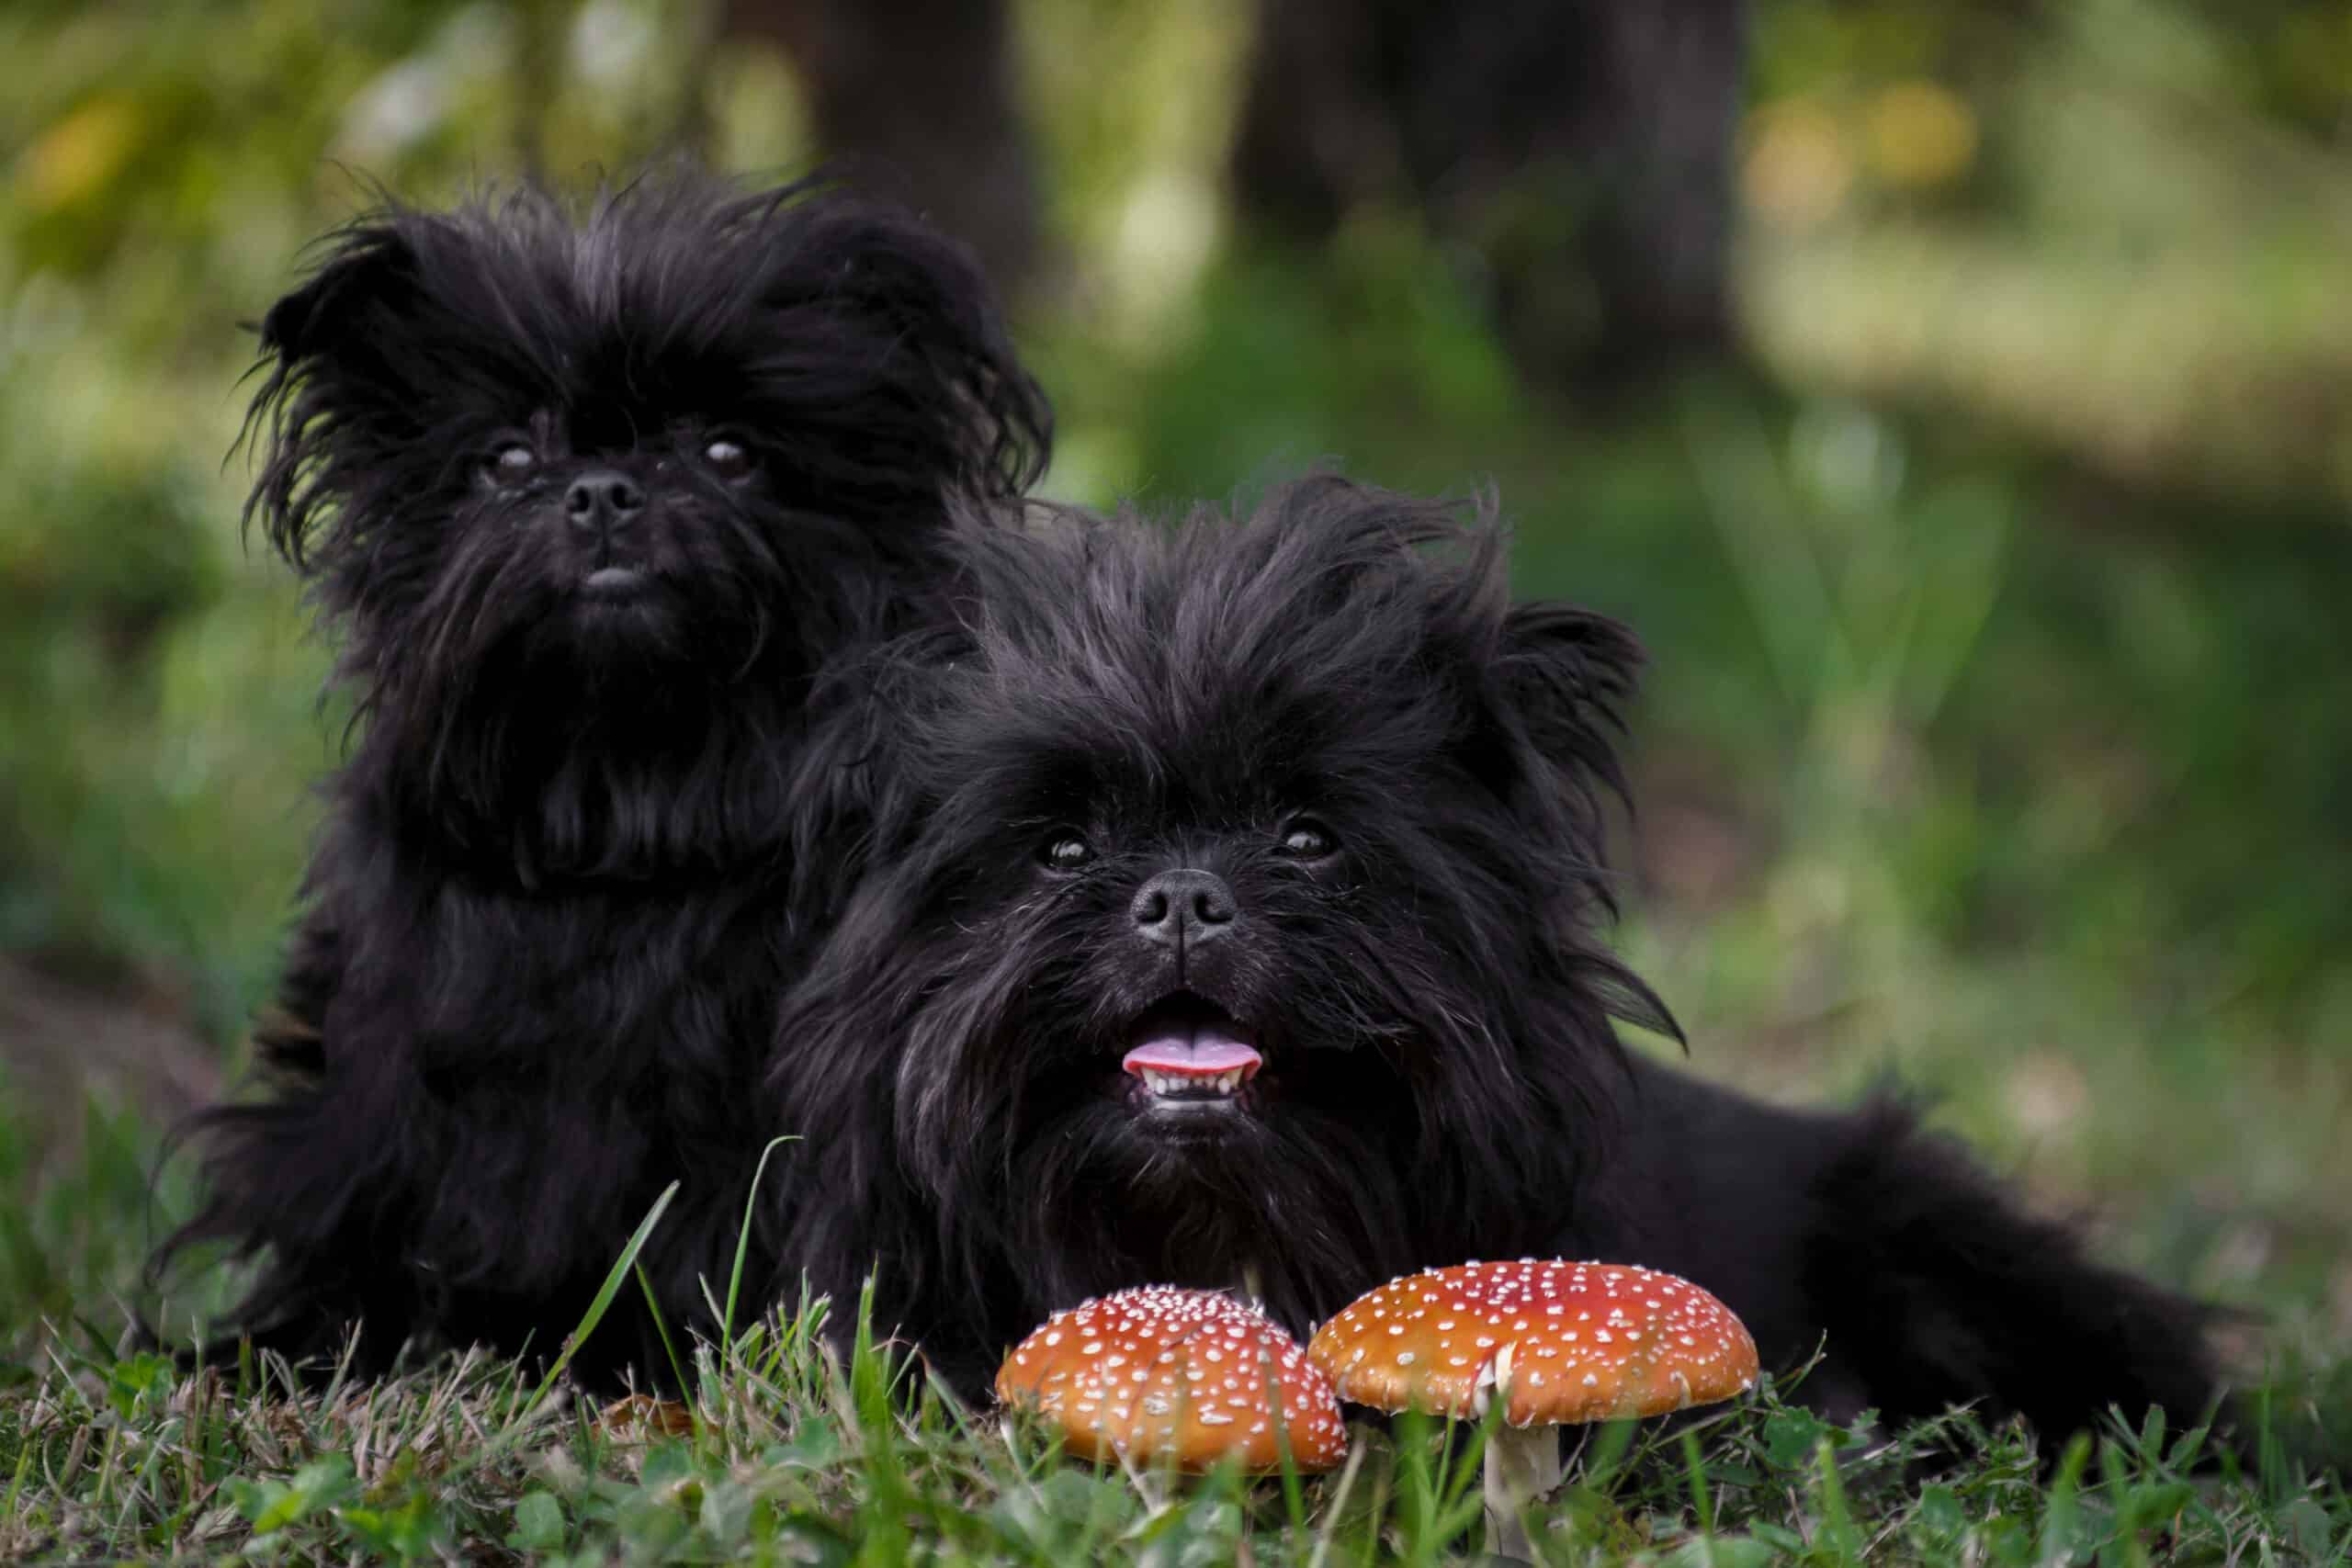 Affenpinscher: Breed Overview, Pictures, Facts & Traits